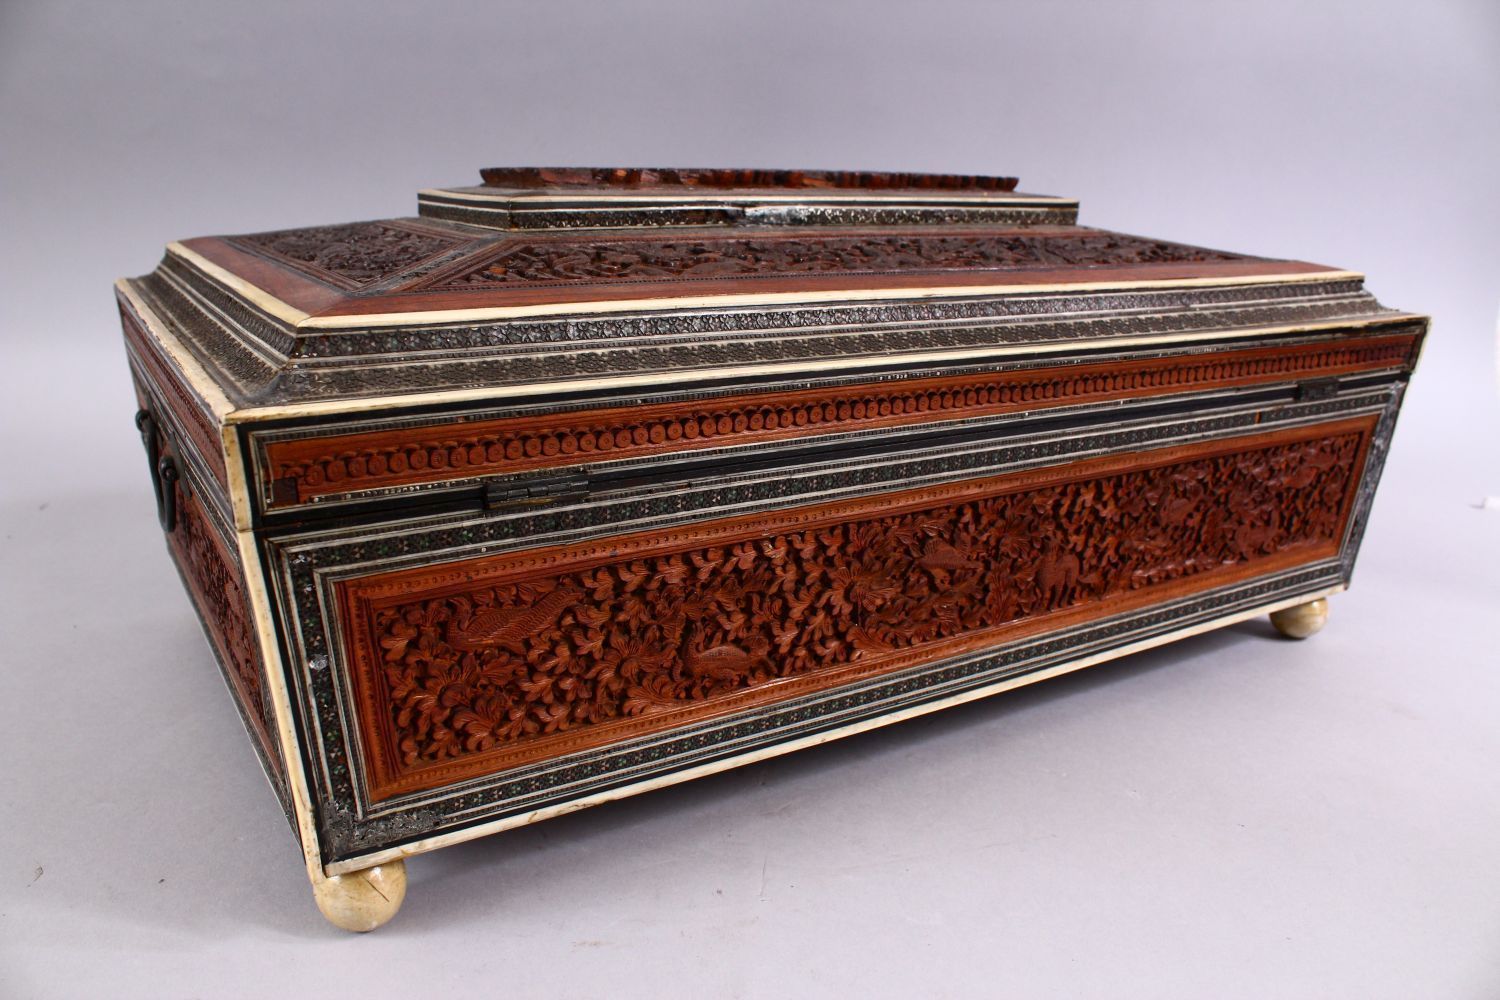 A 19TH CENTURY ANGLO INDIAN INLAID LIDDED SEWING BOX, with carved wood depicting figures and animals - Image 10 of 10